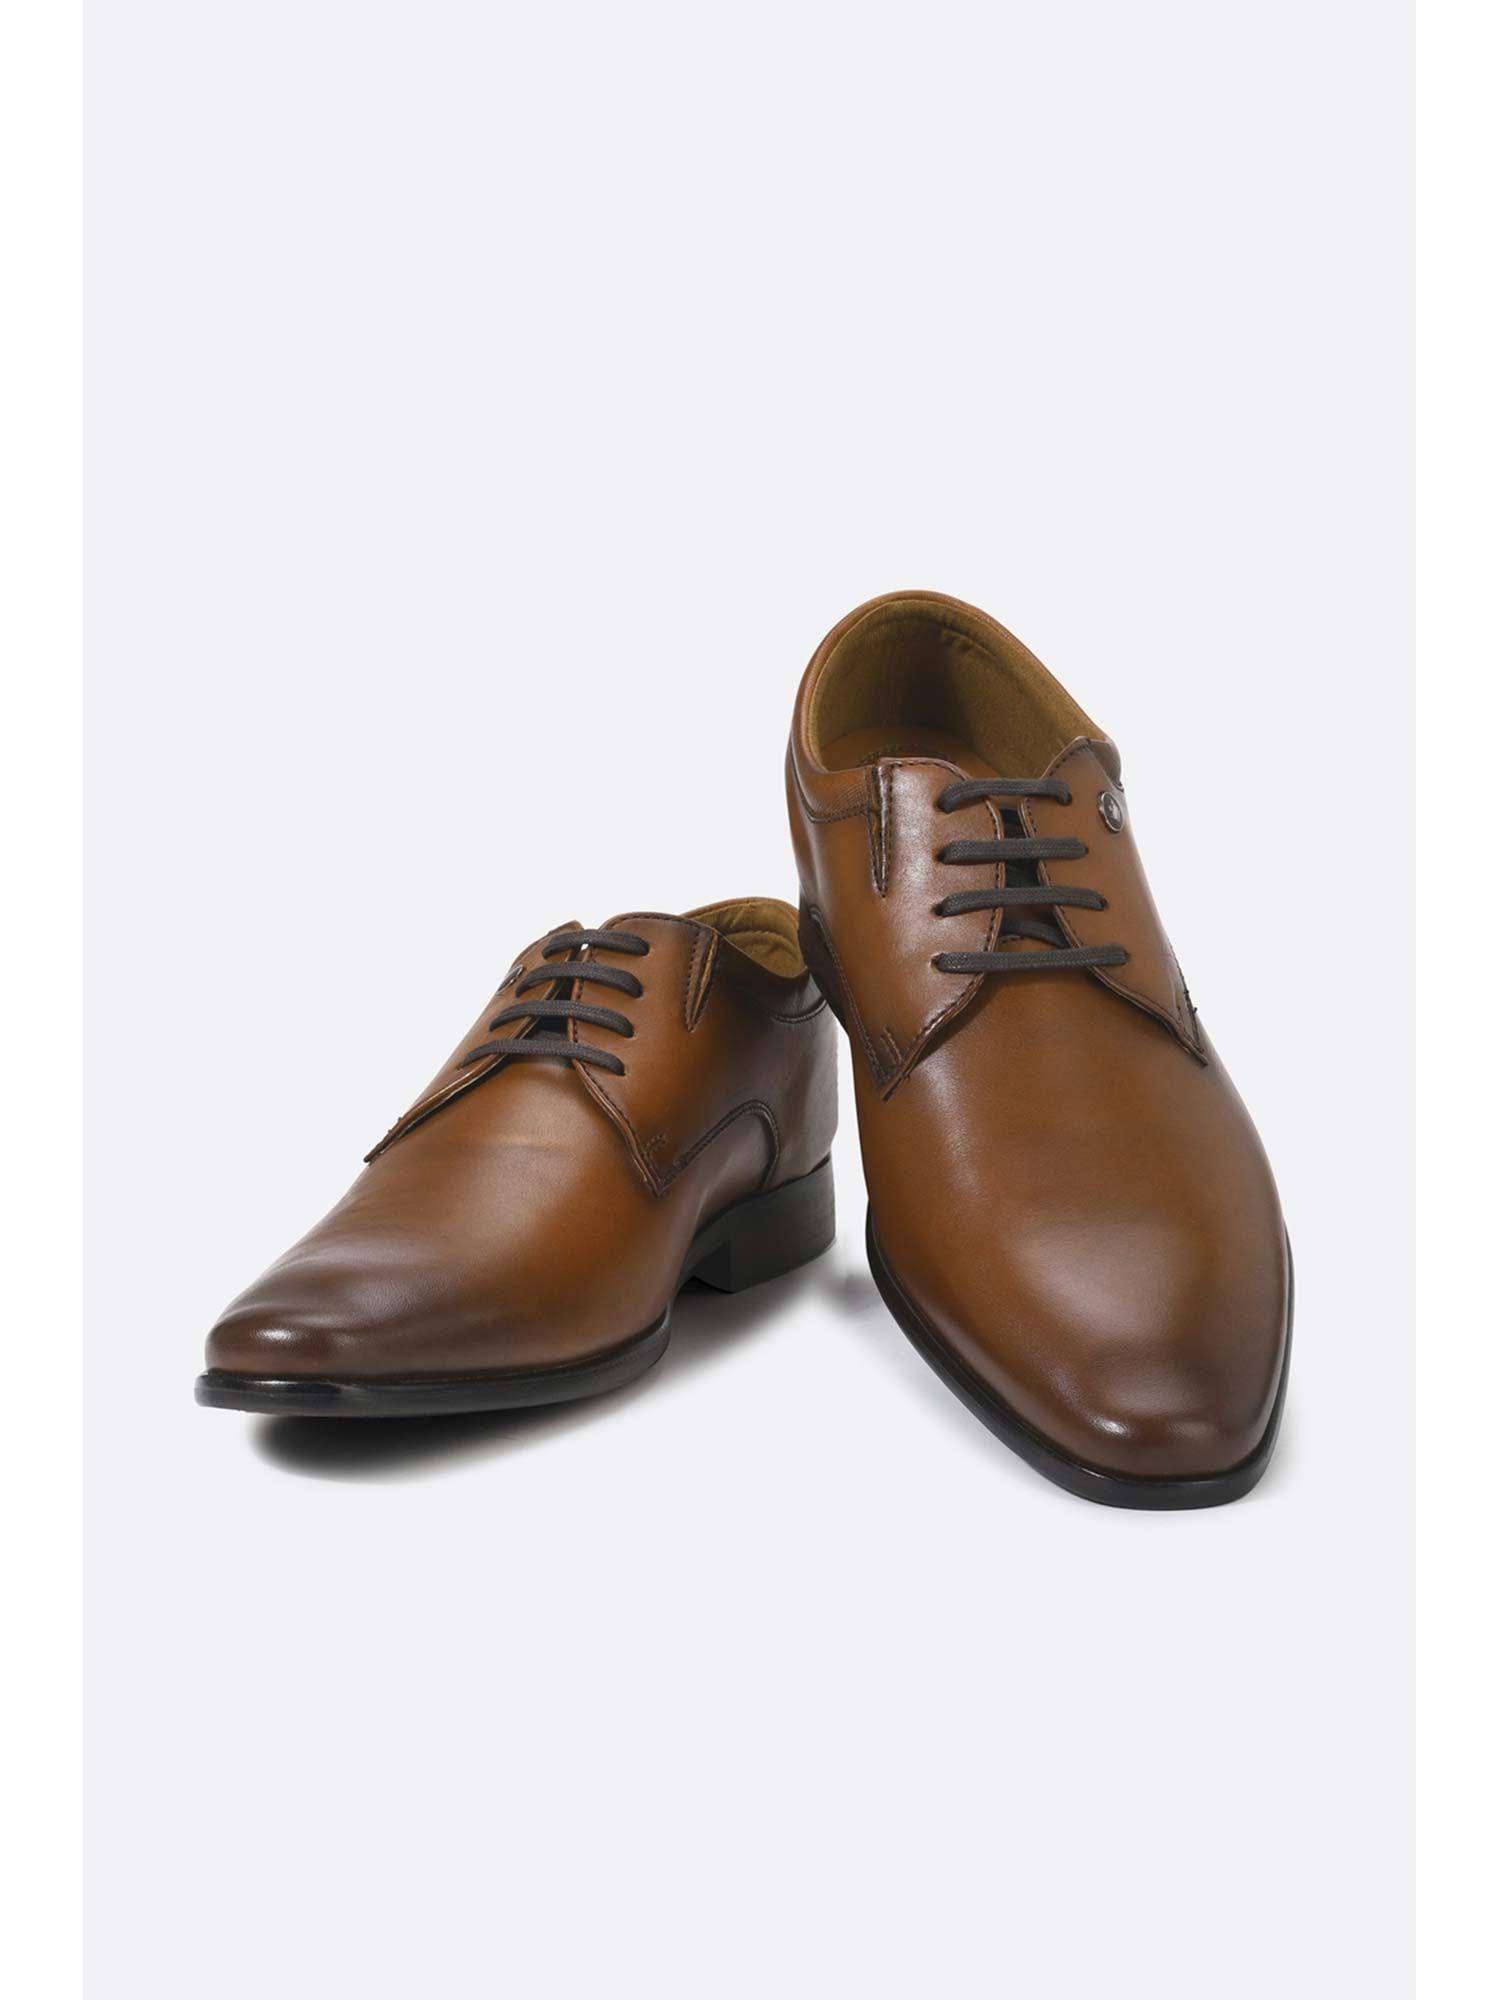 solid brown lace up shoes